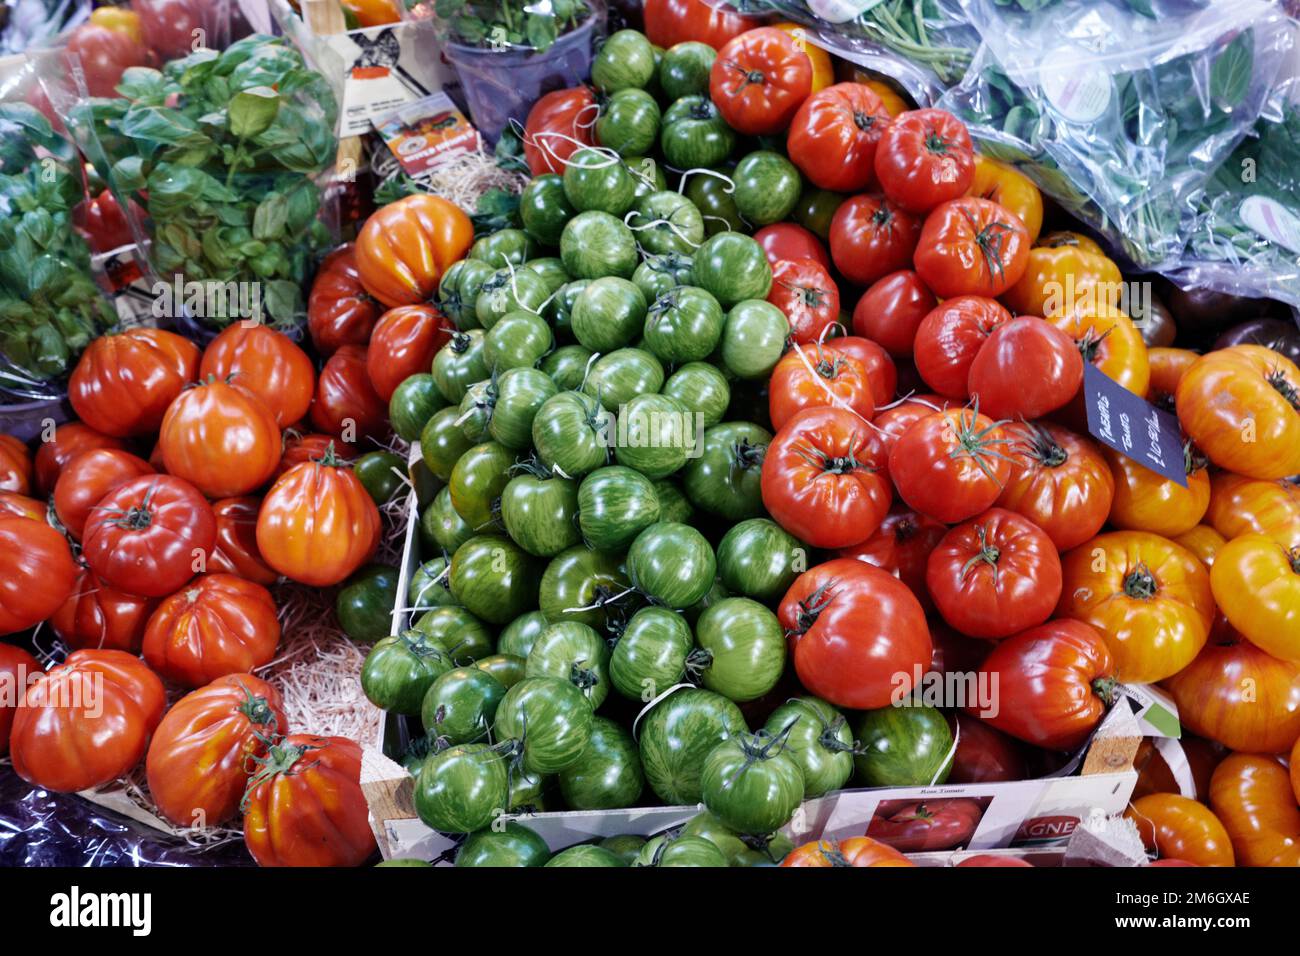 Fresh vibrant ripe tomatoes on sale in a market Stock Photo